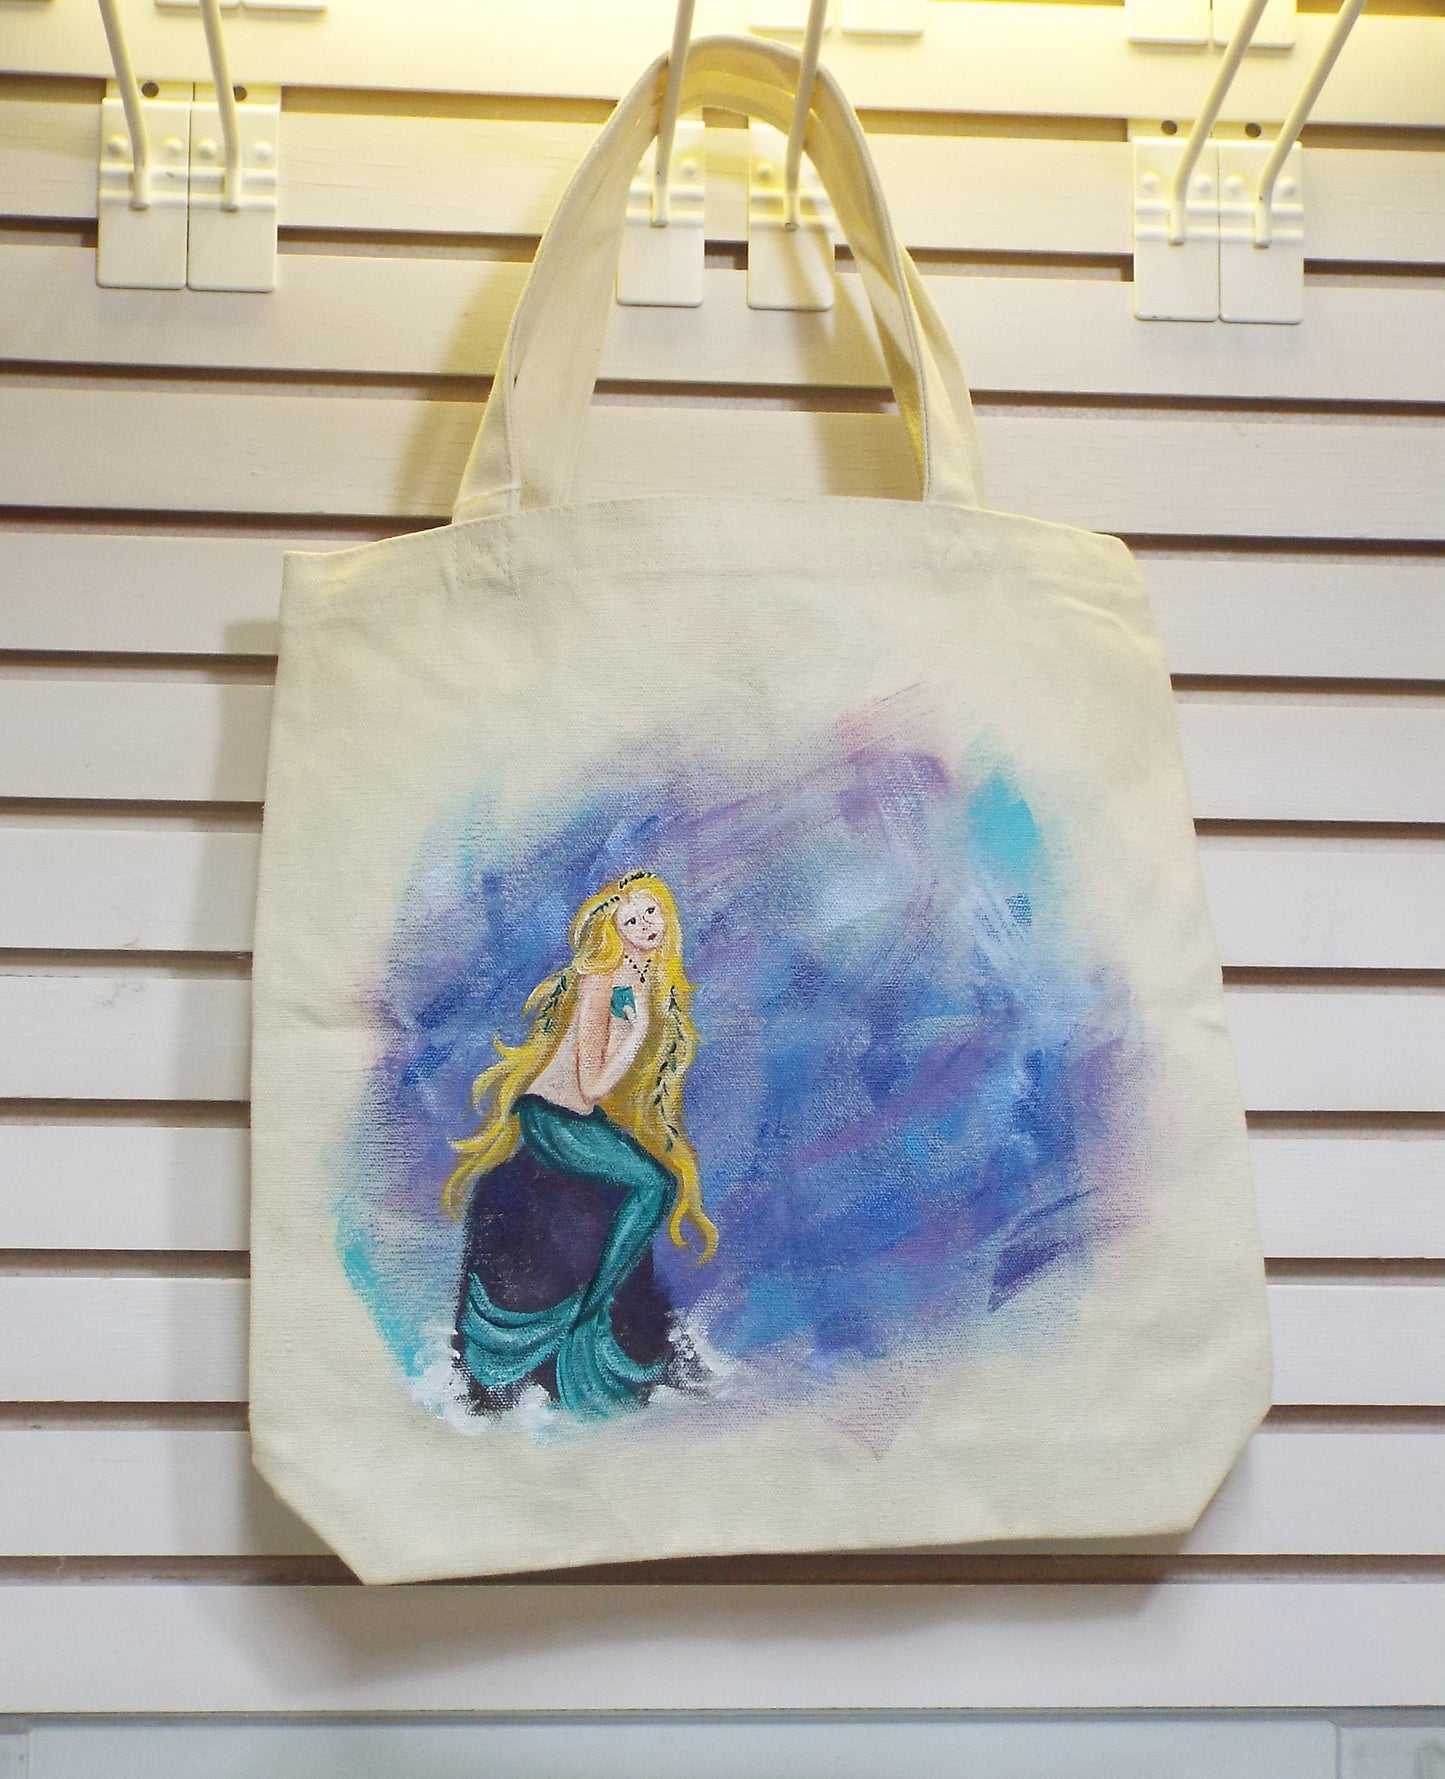 Painted Canvas Totes - NEW LOWER PRICE!